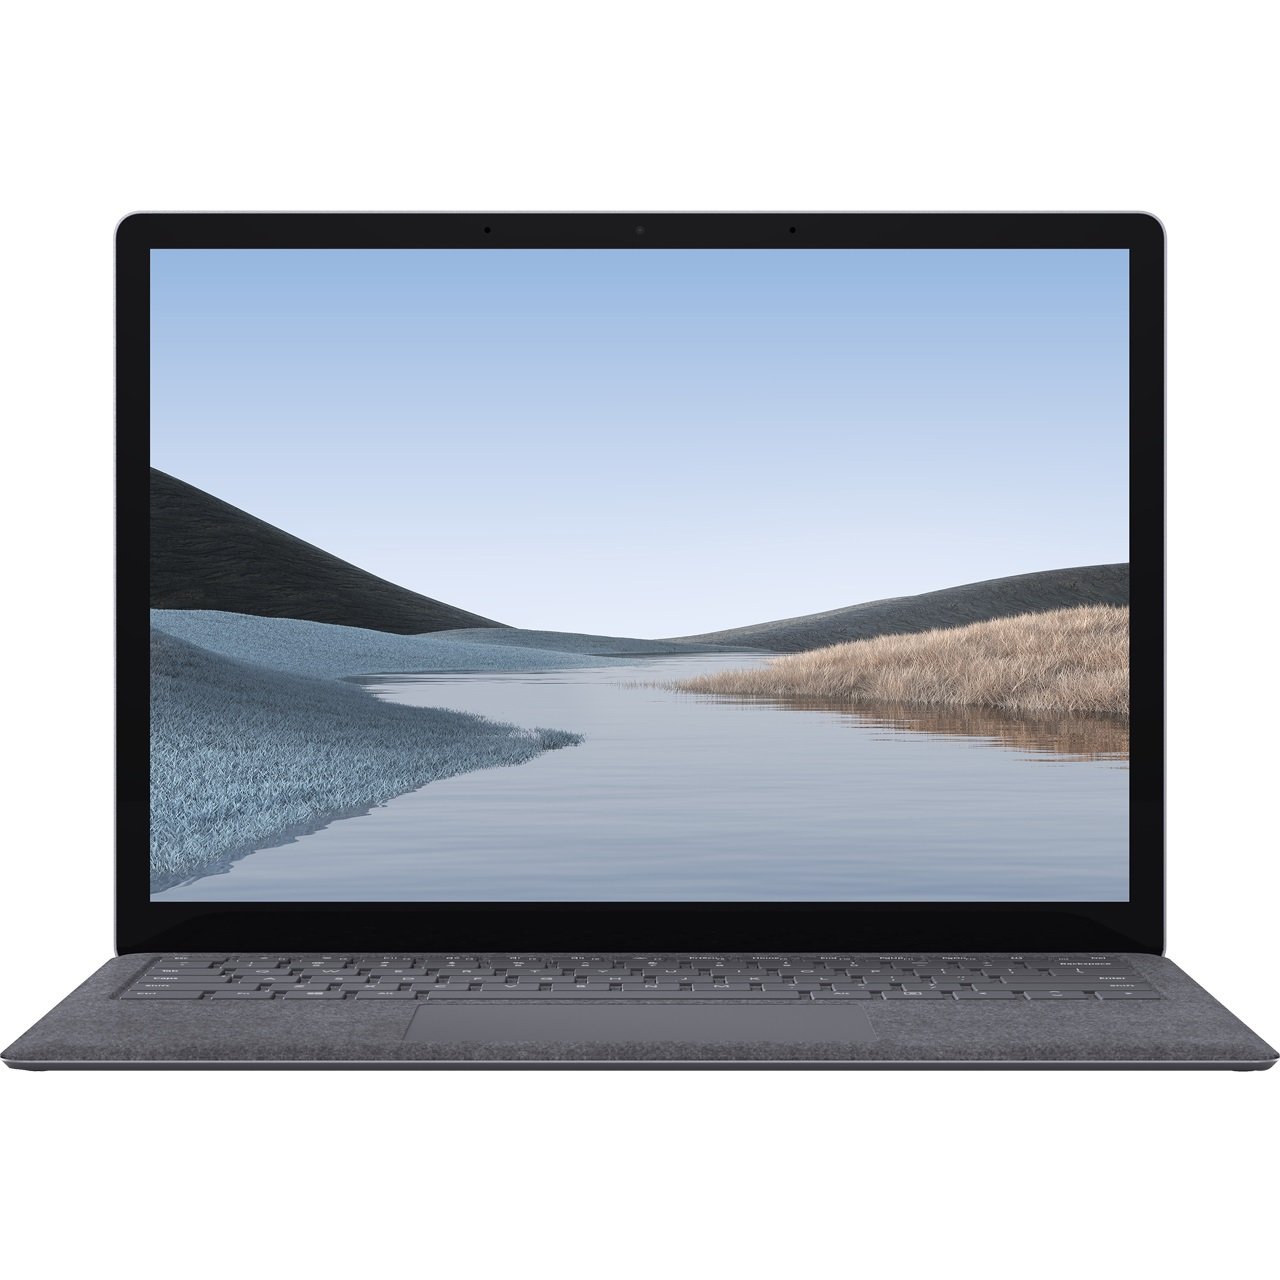 Microsoft Surface Laptop 3 13.5in i5 8GB 128GB Review